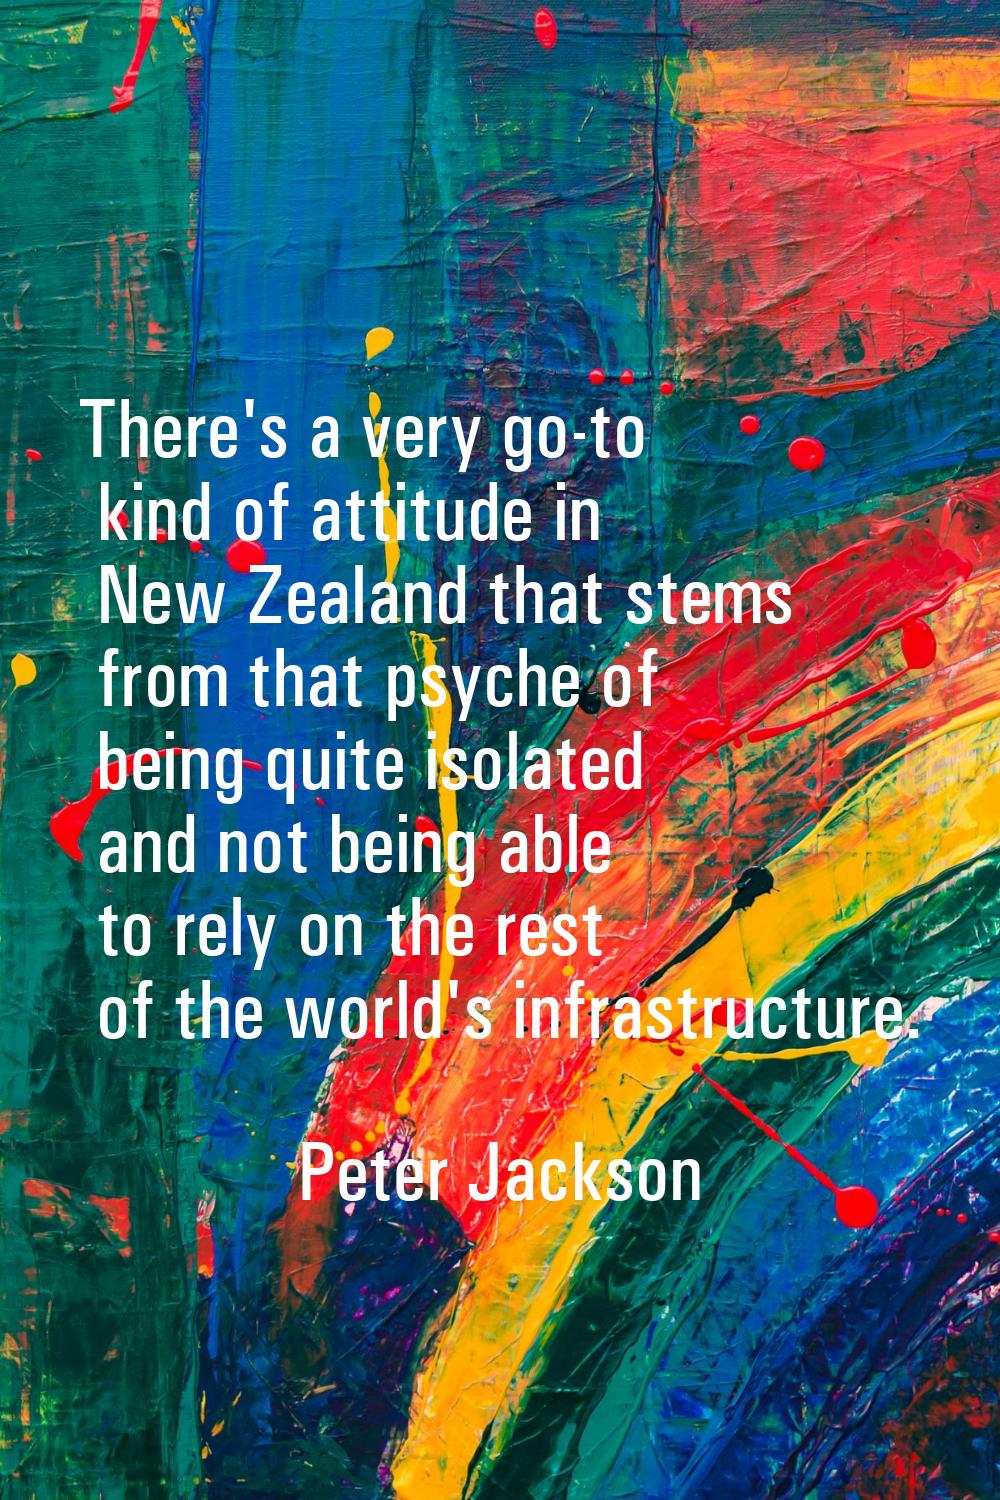 There's a very go-to kind of attitude in New Zealand that stems from that psyche of being quite iso